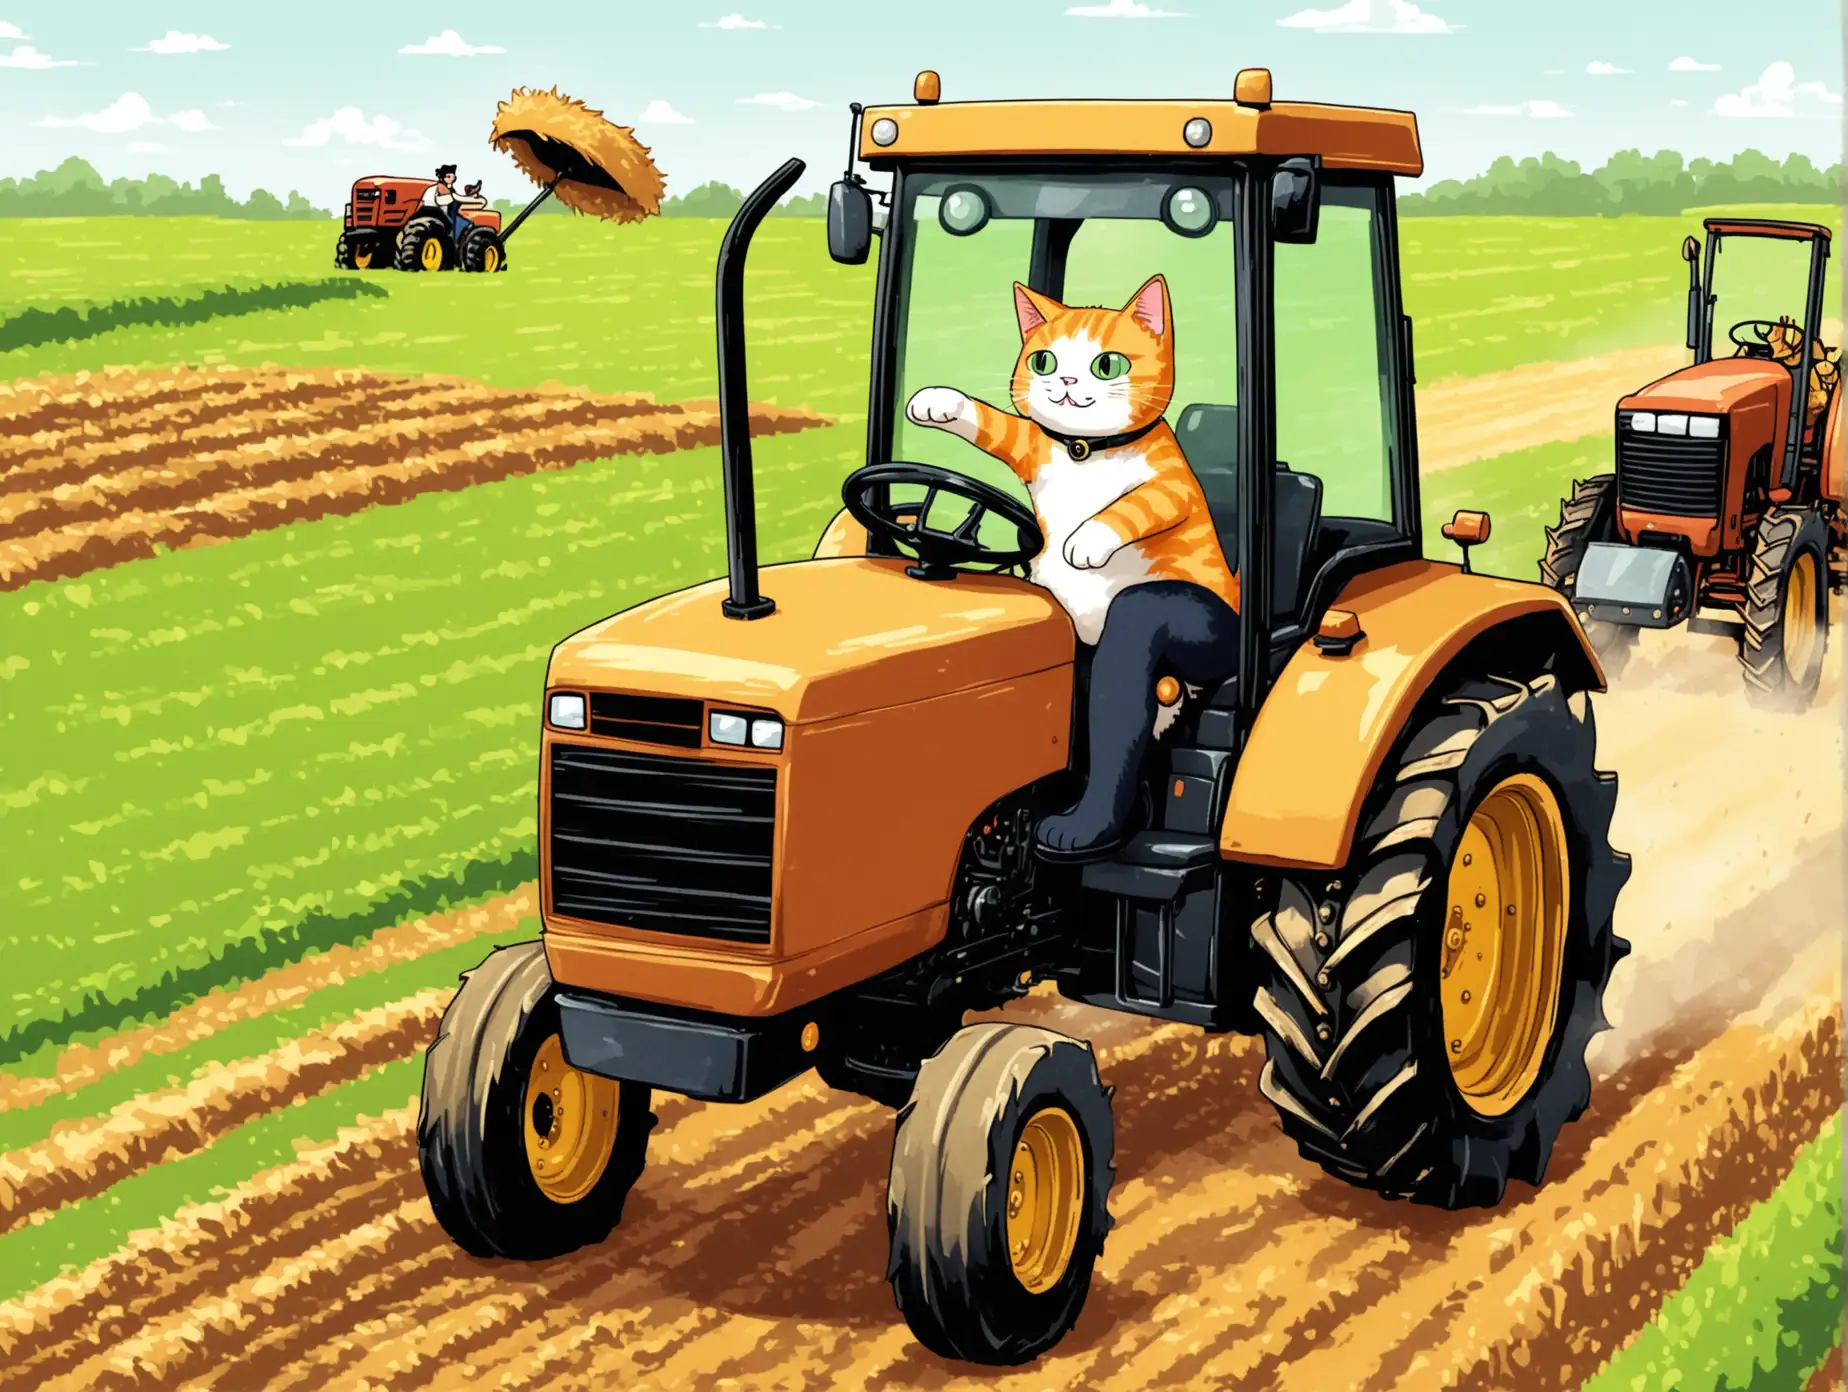 Cat-Driving-Tractor-Illustration-with-Cute-Animal-Cartoon-Style